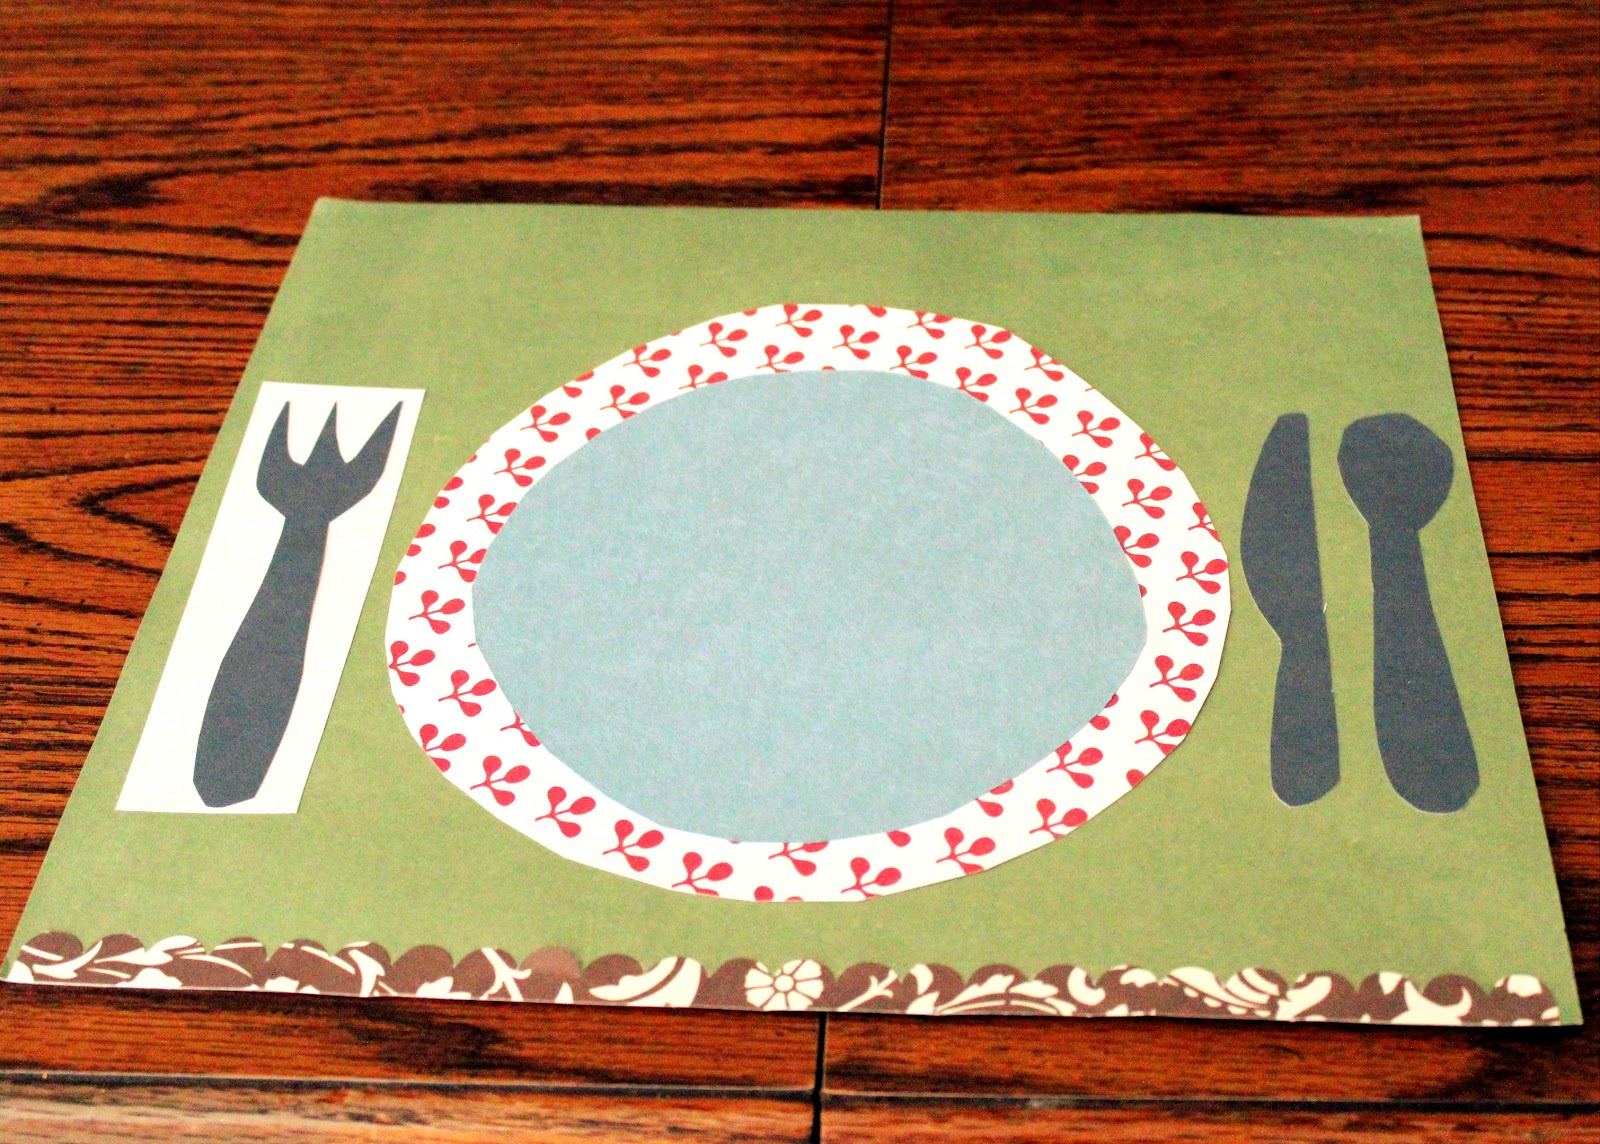 diy-placemats-great-for-beginners-step-by-step-tutorial-youtube